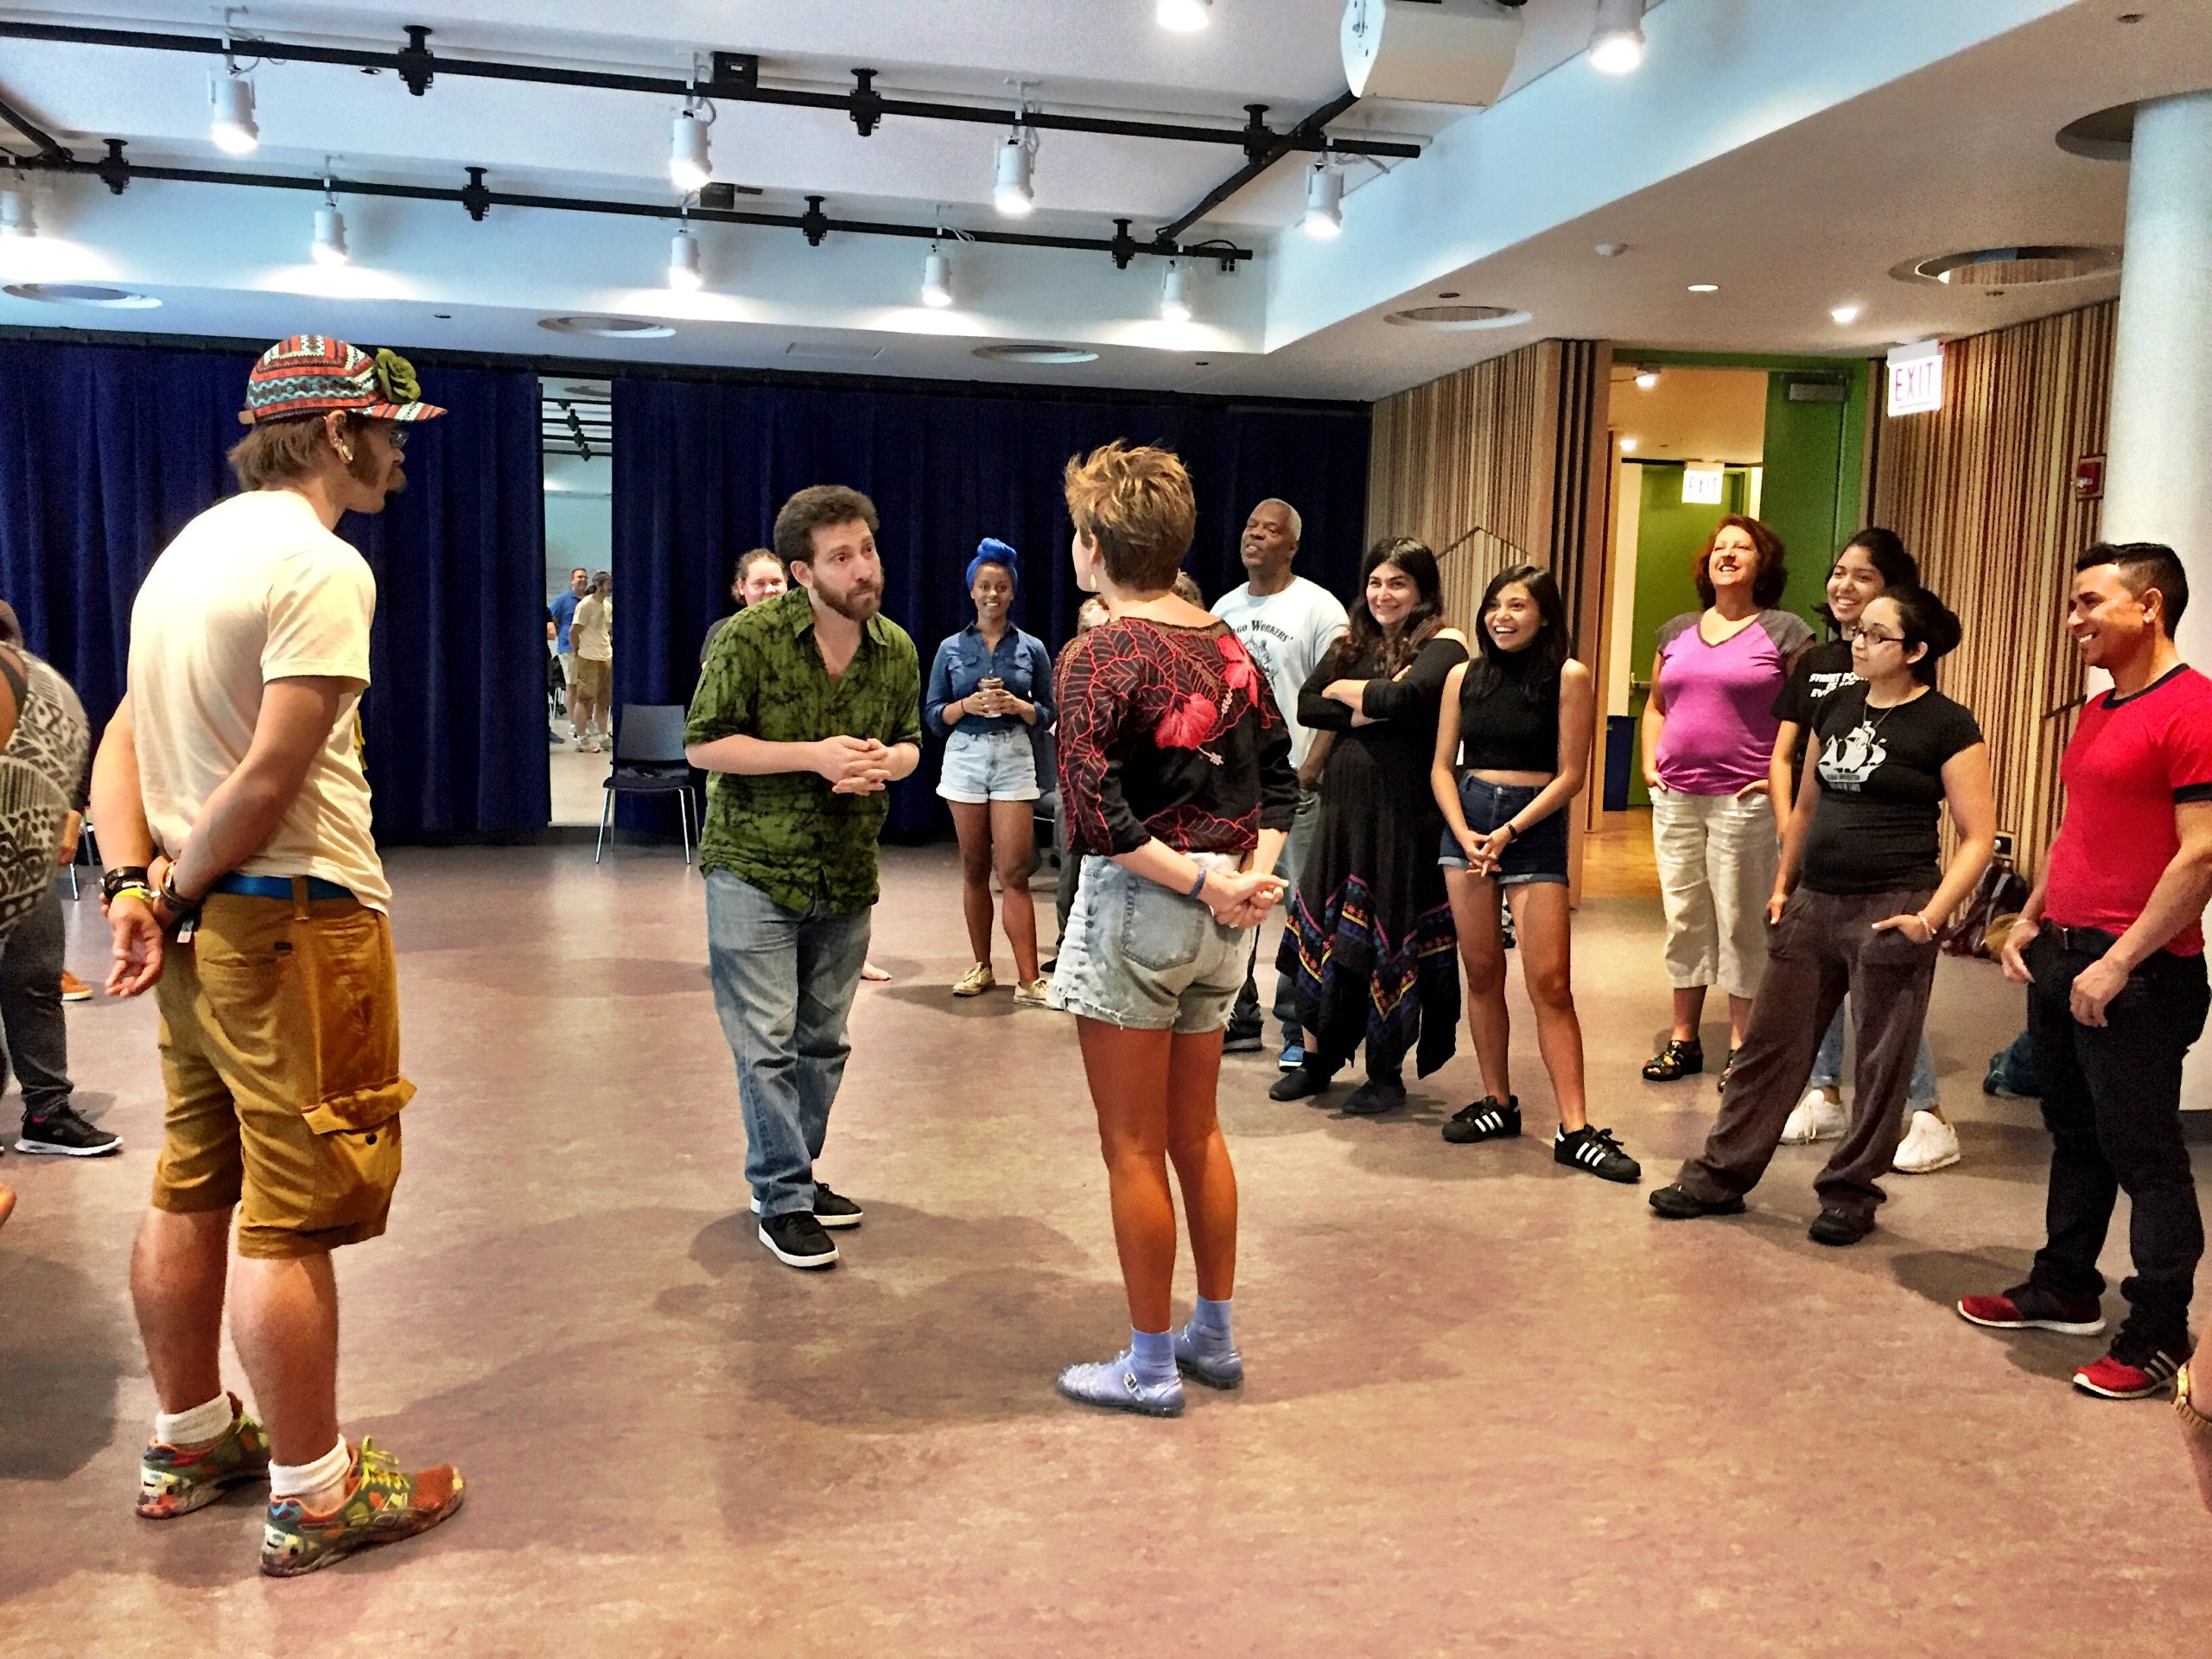 Image description: Photo of a TO workshop in which Julian Boal is jokering. Julian and a workshop participant stand in the center of a loose circle of other participants. Julian and the participant make eye contact facing each other as the other participants look on with humor.